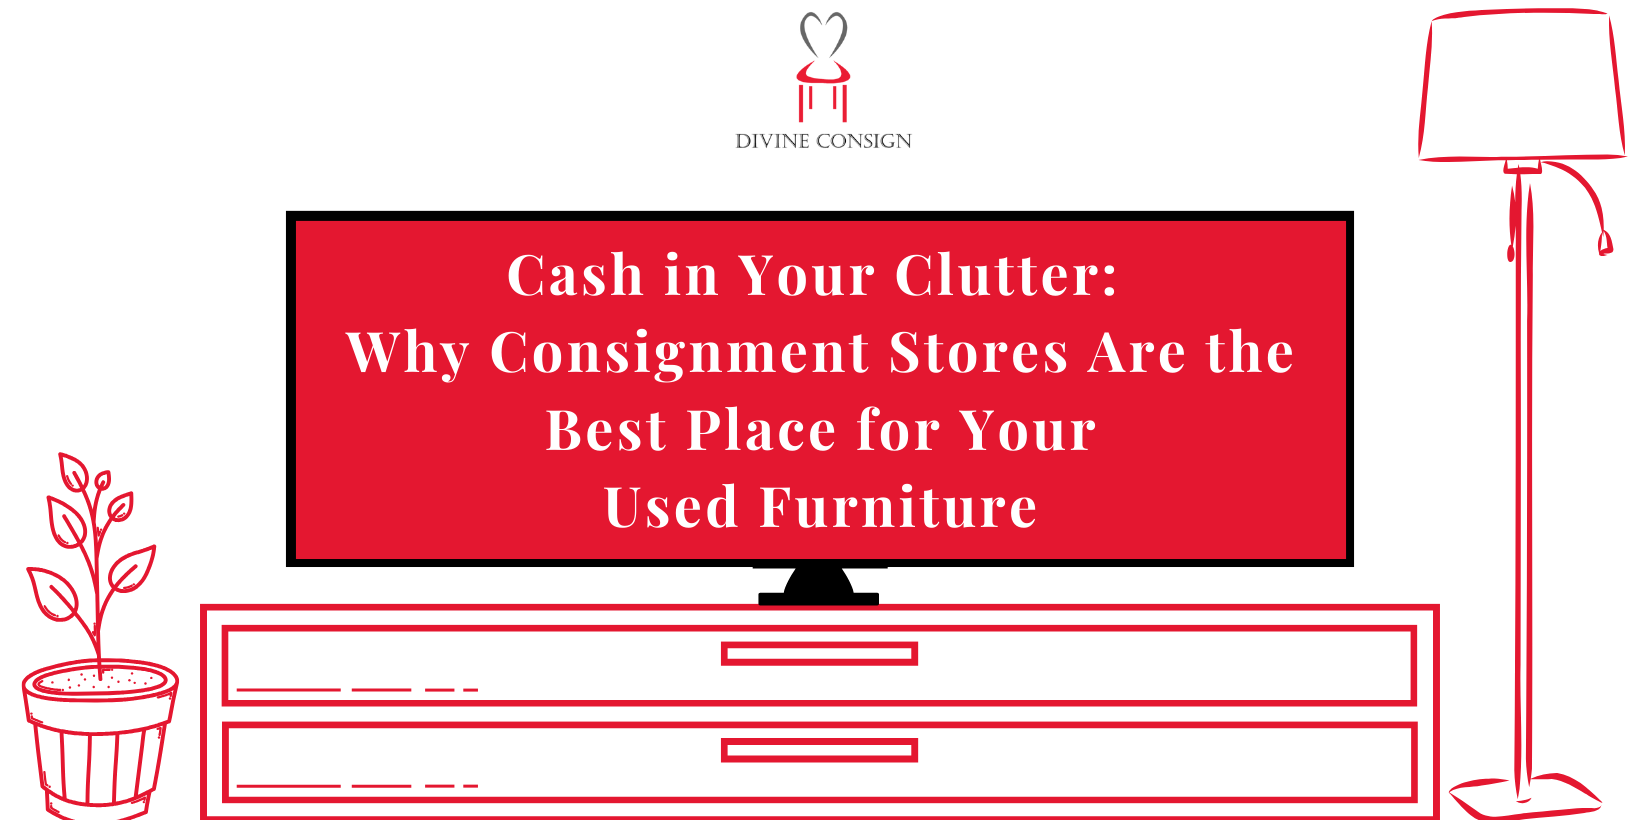 Cash in Your Clutter: Why Consignment Stores are the Best Place for Your Used Furniture